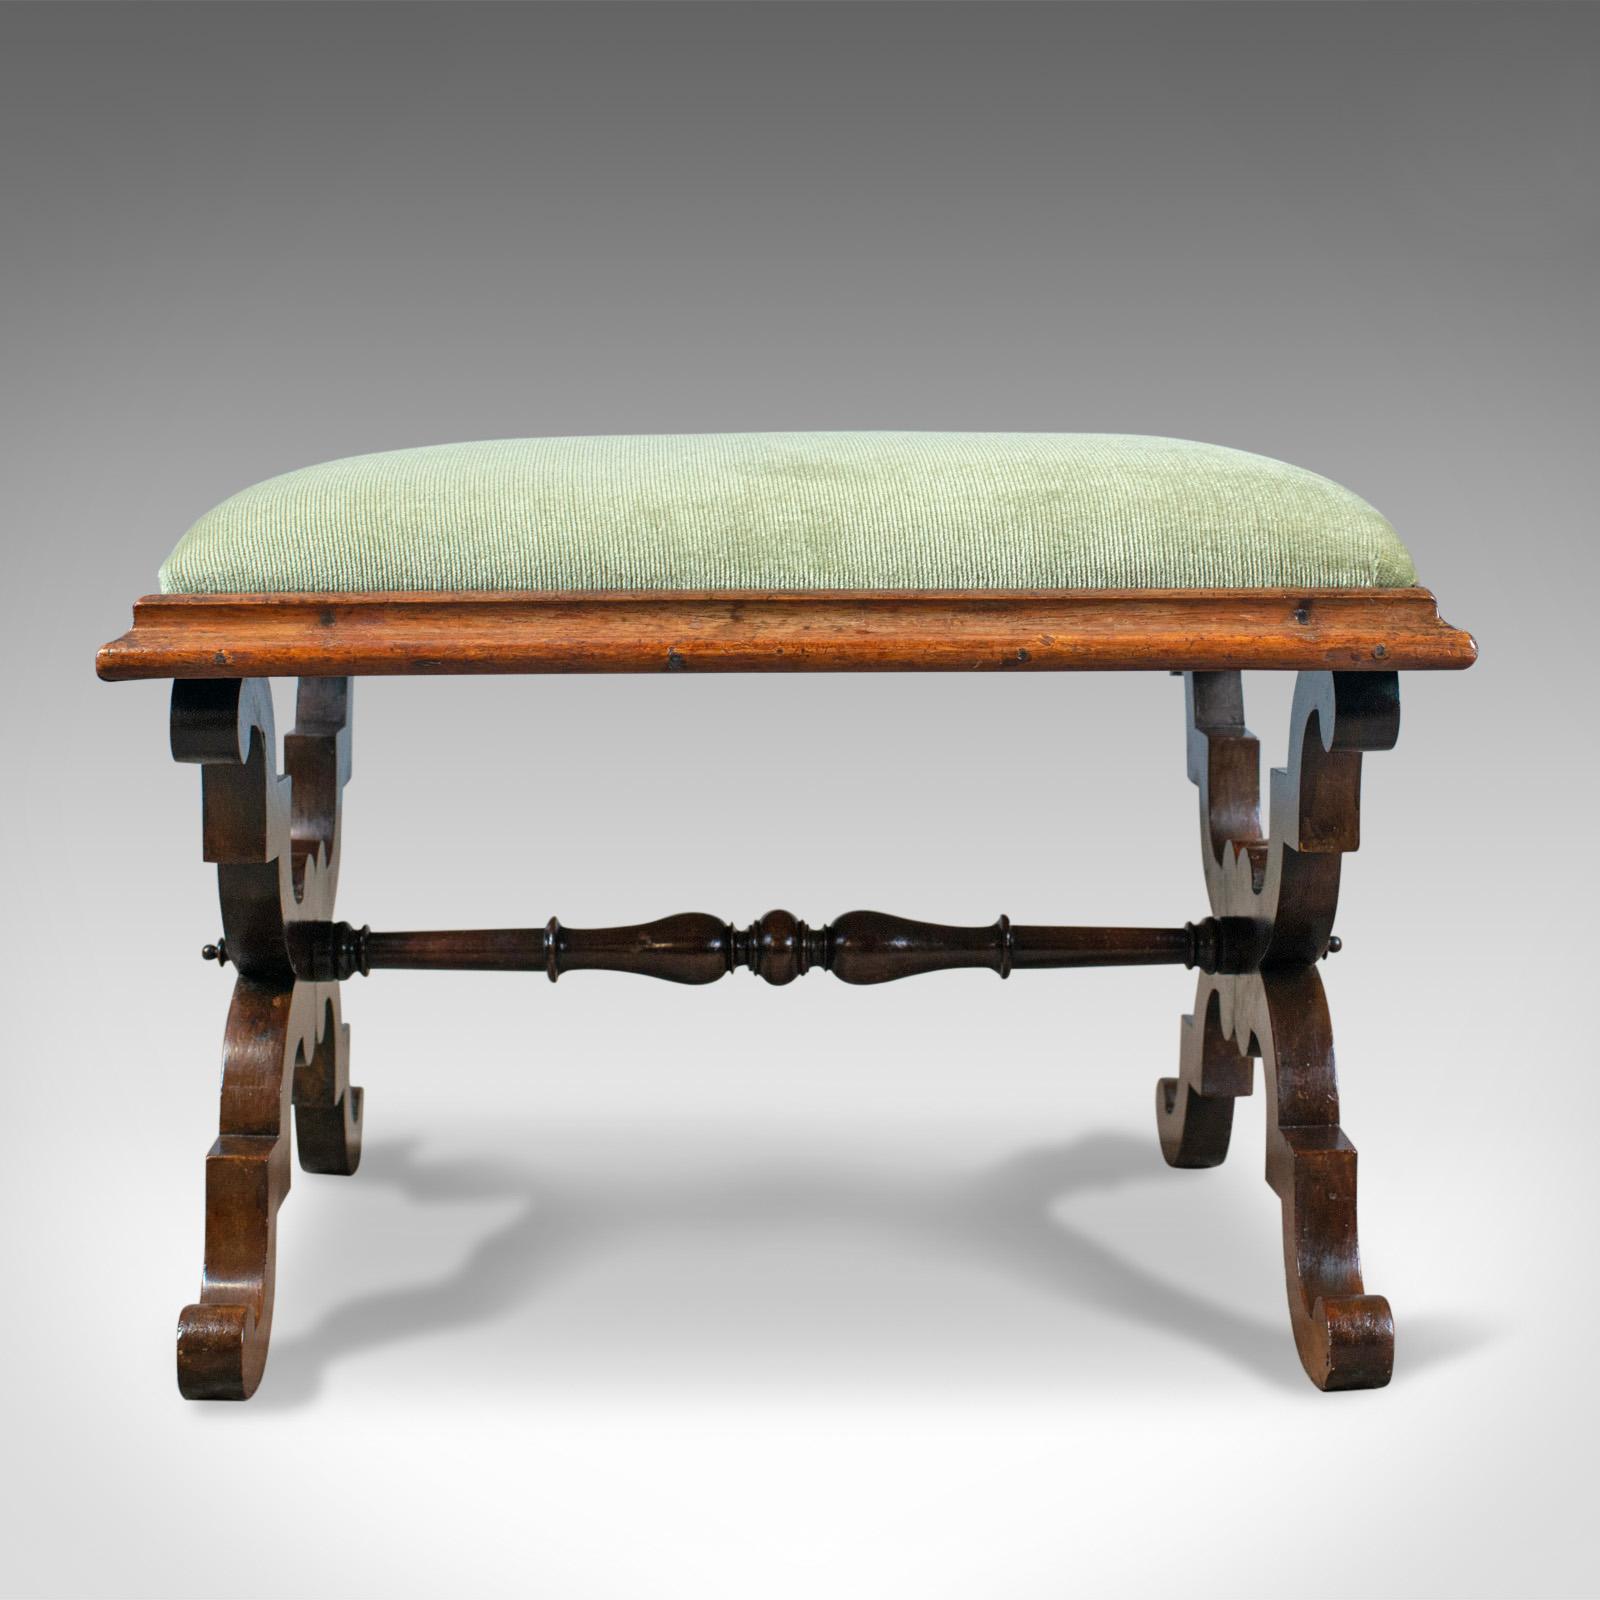 This is an antique dressing stool in rosewood with an olive green velour cloth. An English foot stool dating to the Regency period of the early 19th century, circa 1820.

Attractive, warm tones to the rosewood frame
Grain interest with a